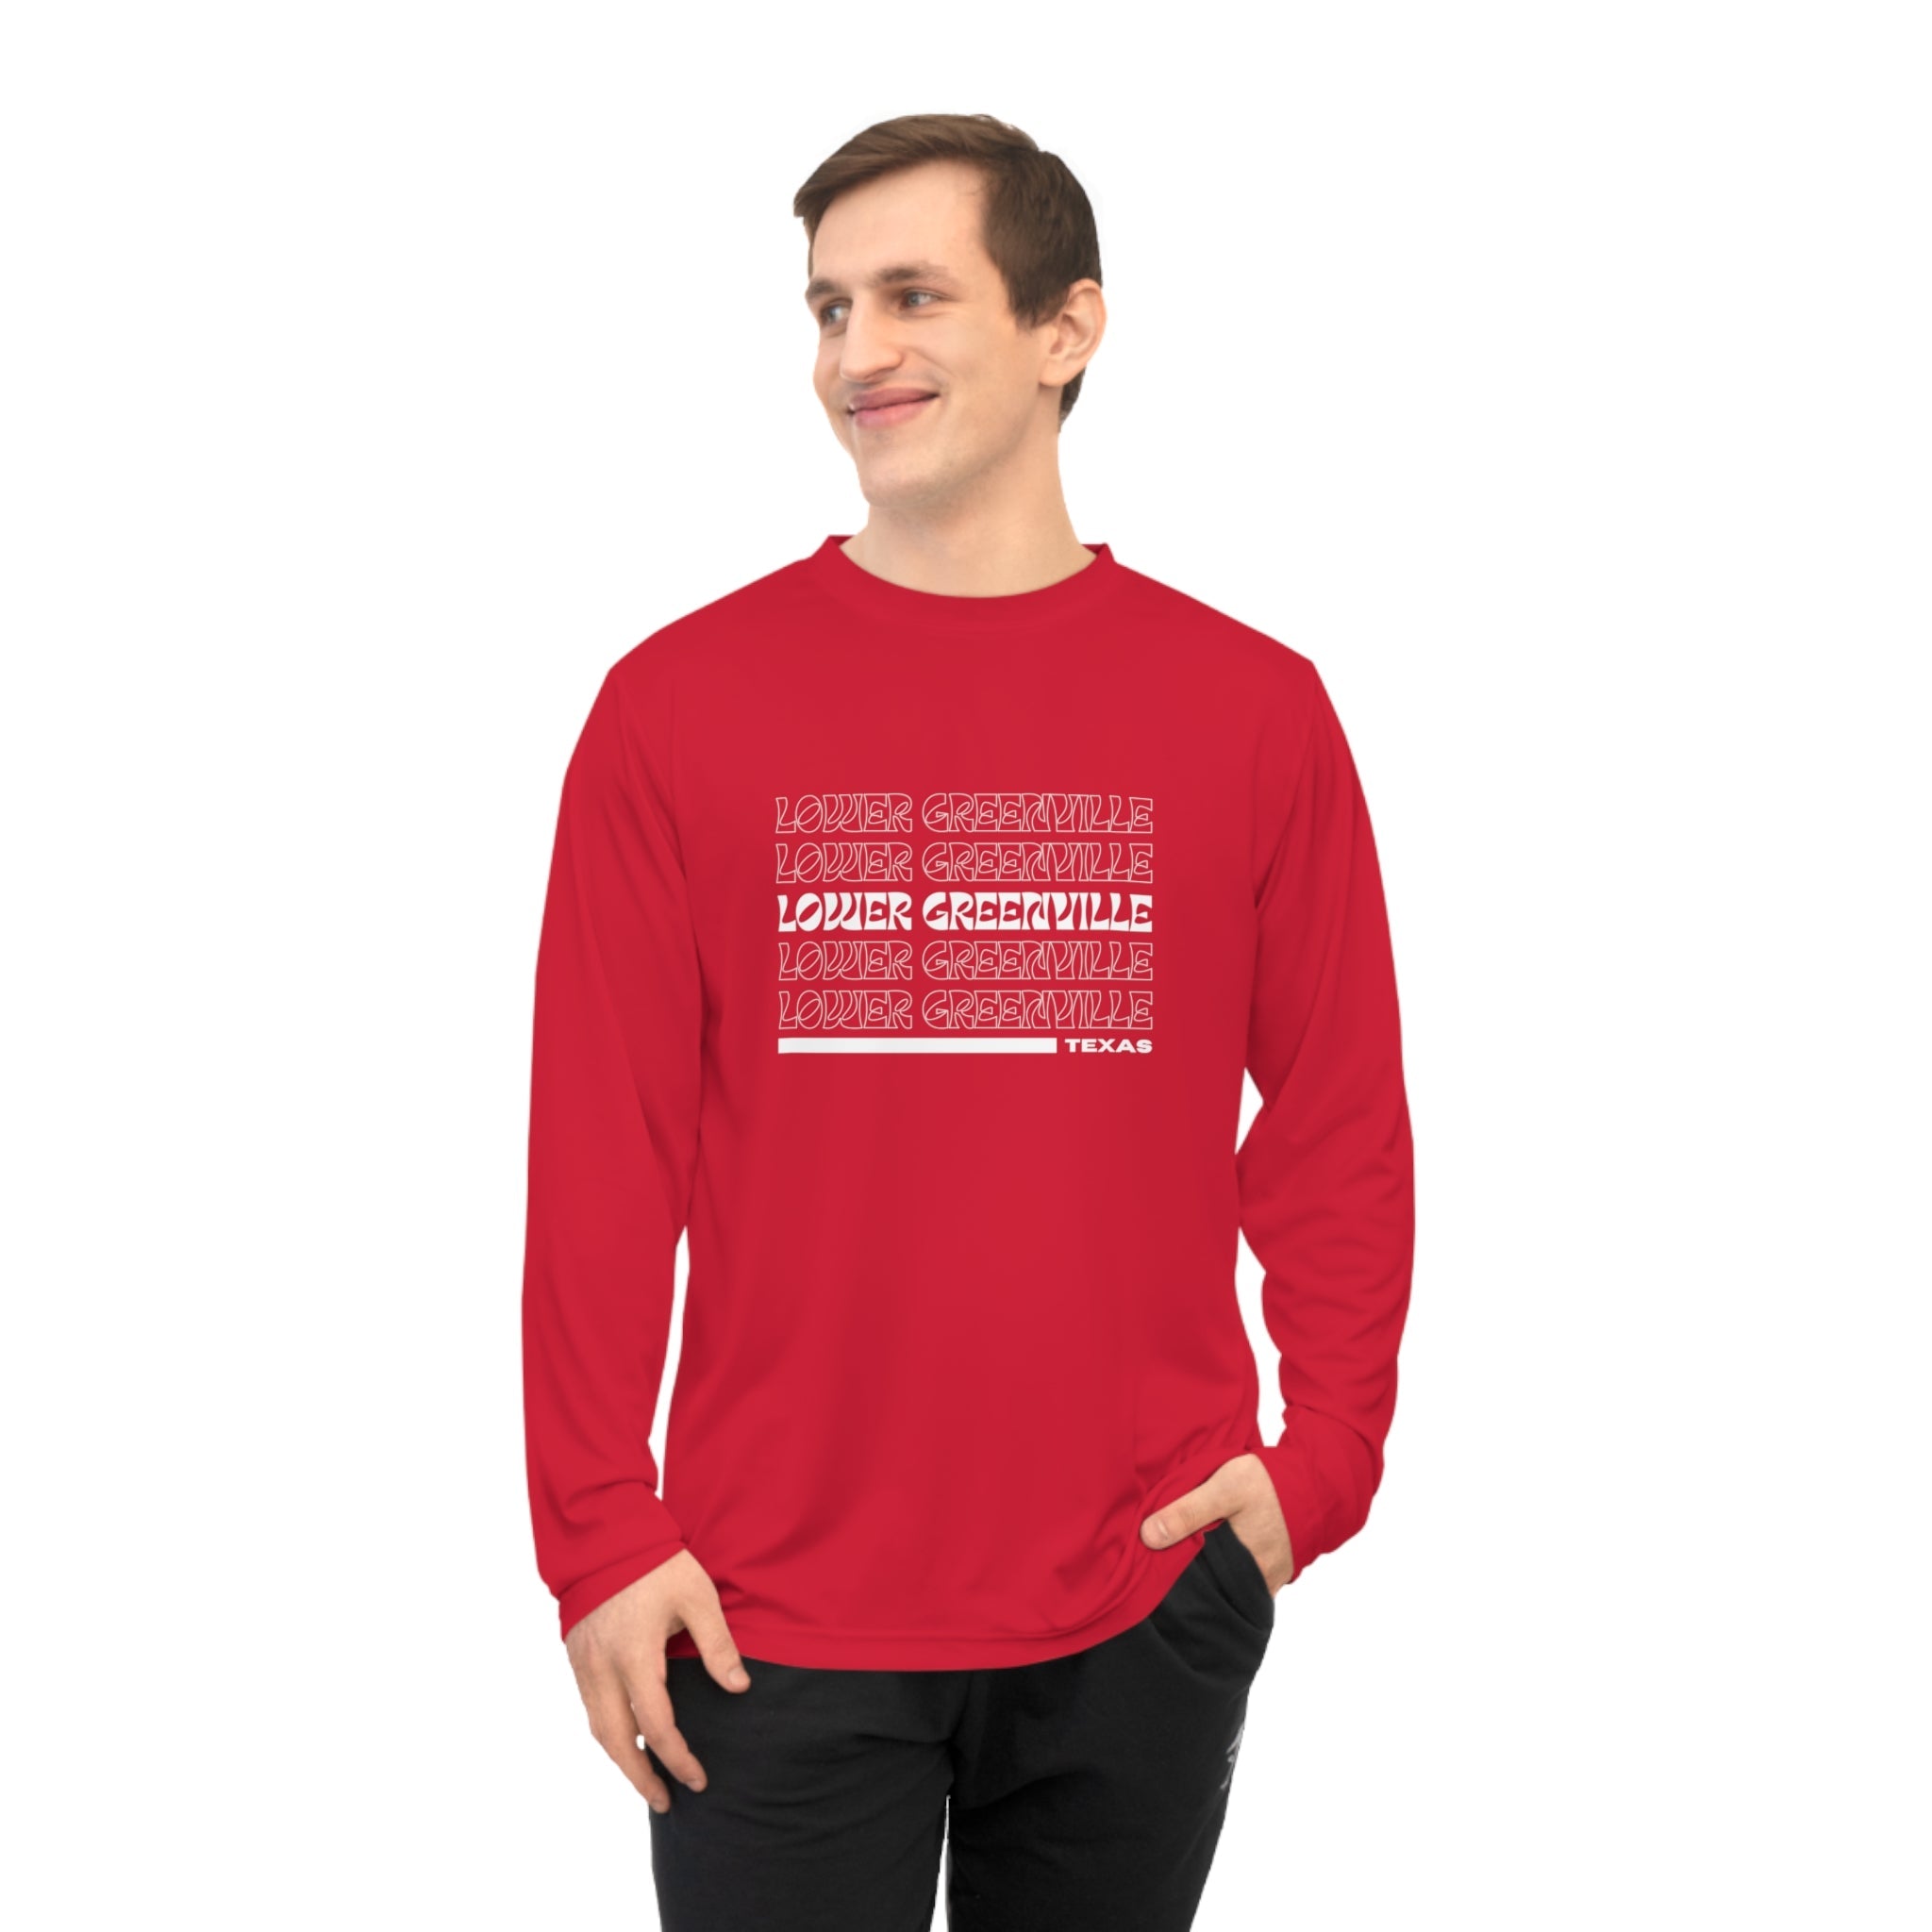 Retro Vibe Lower Greenville Athletic Long Sleeve Shirt - Friends of Lower Greenville